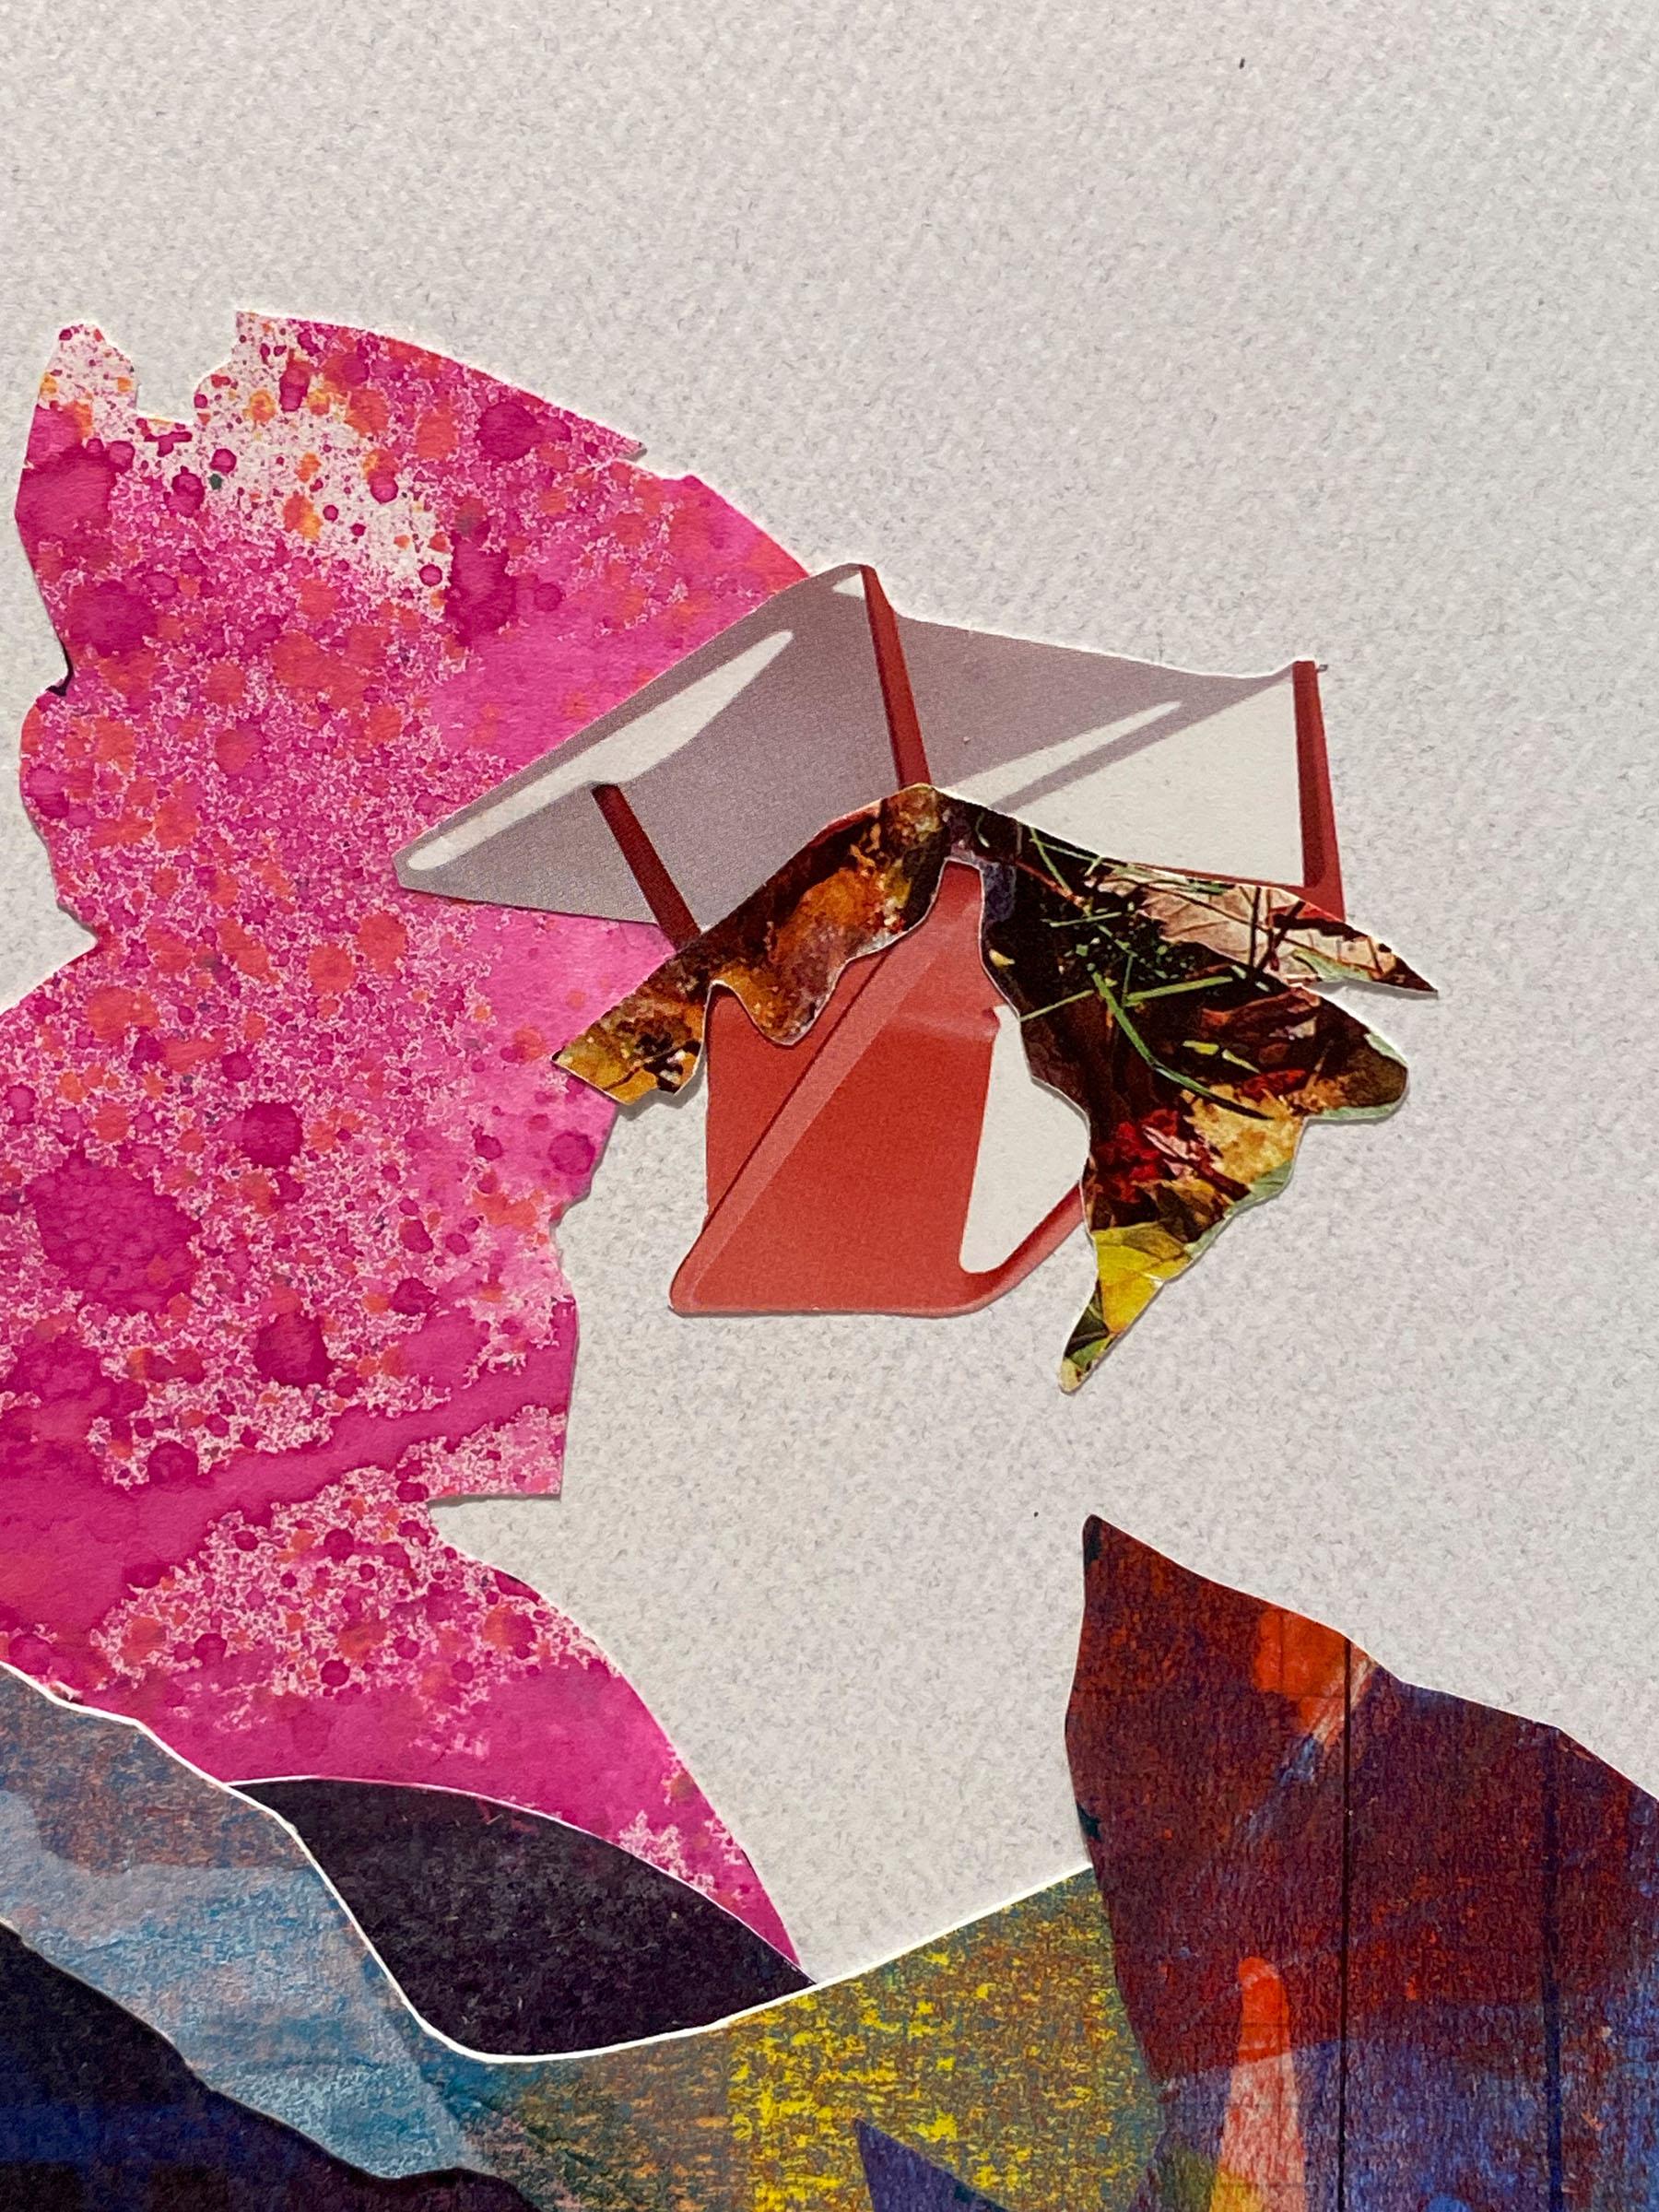 Monica DeSalvo’s “Acceleration” is an 11 x 11 inch abstract collage with irregular edges on flecked felt paper. Bold negative spaces fortify a layered structure with pink, red, dark purple, and blue monotype fragments, botanical elements, and